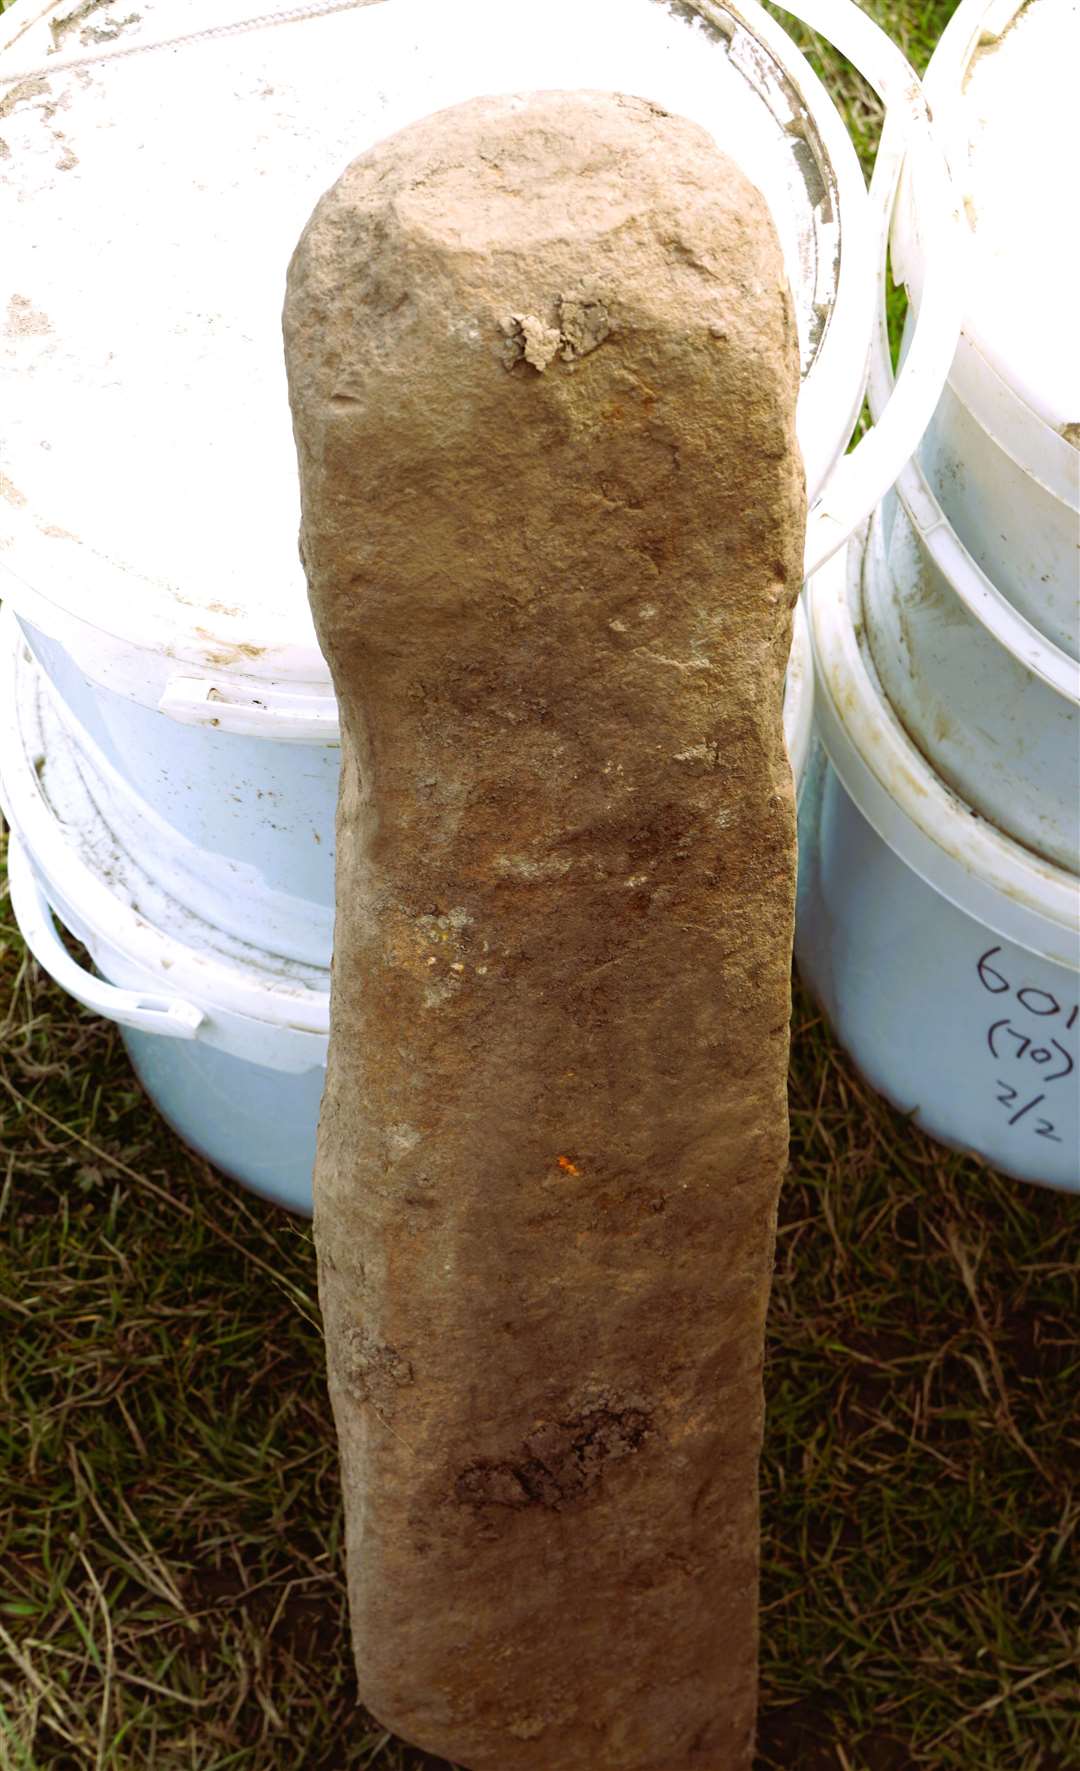 This stone post shows evidence that it would have stood upright and utilised as a tethering device, possibly for animals. Picture: DGS